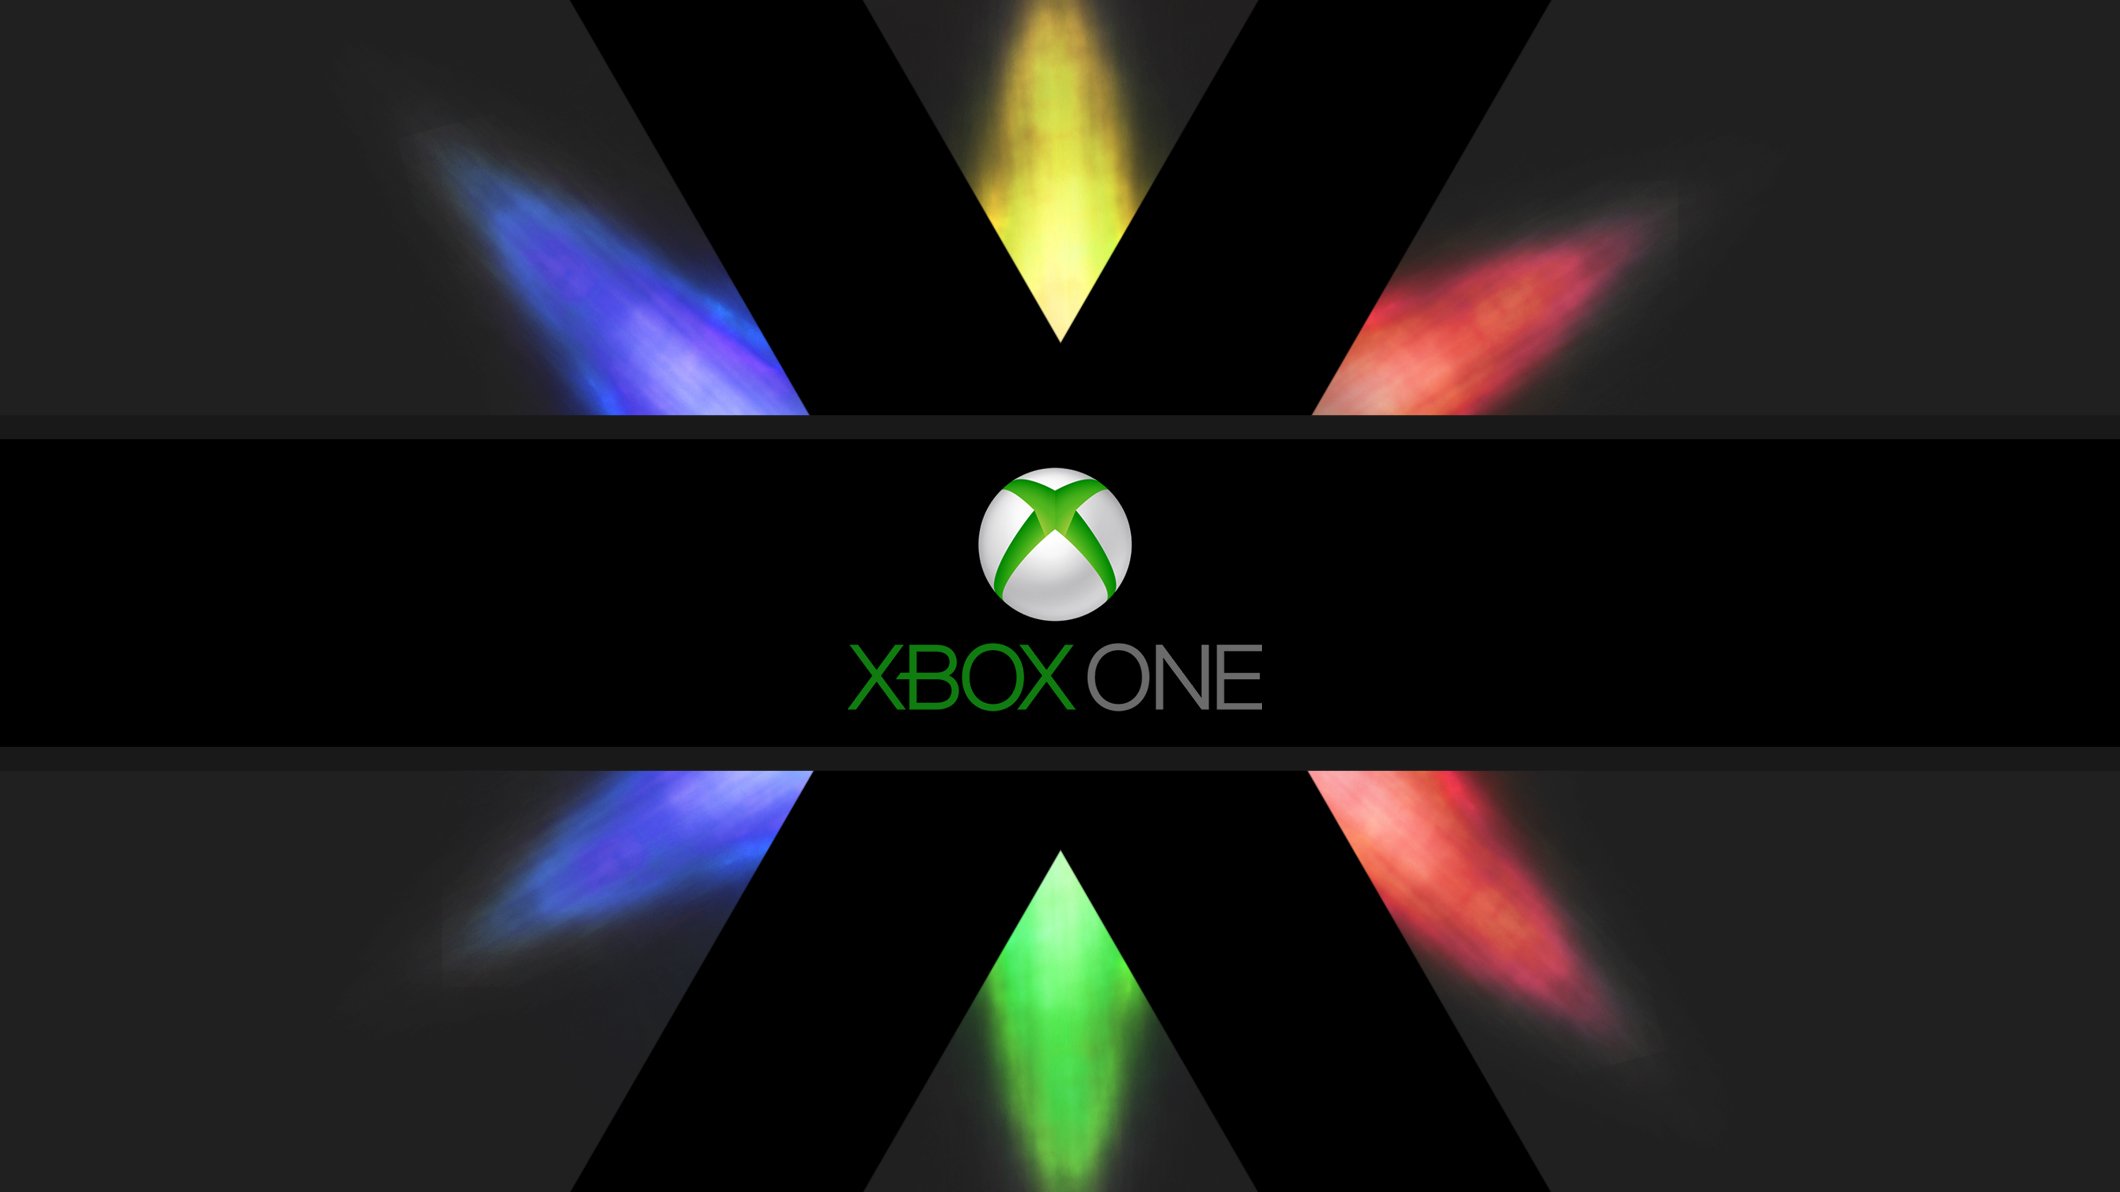 XBOX ONE video game system microsoft wallpaper 2120x1192 392061